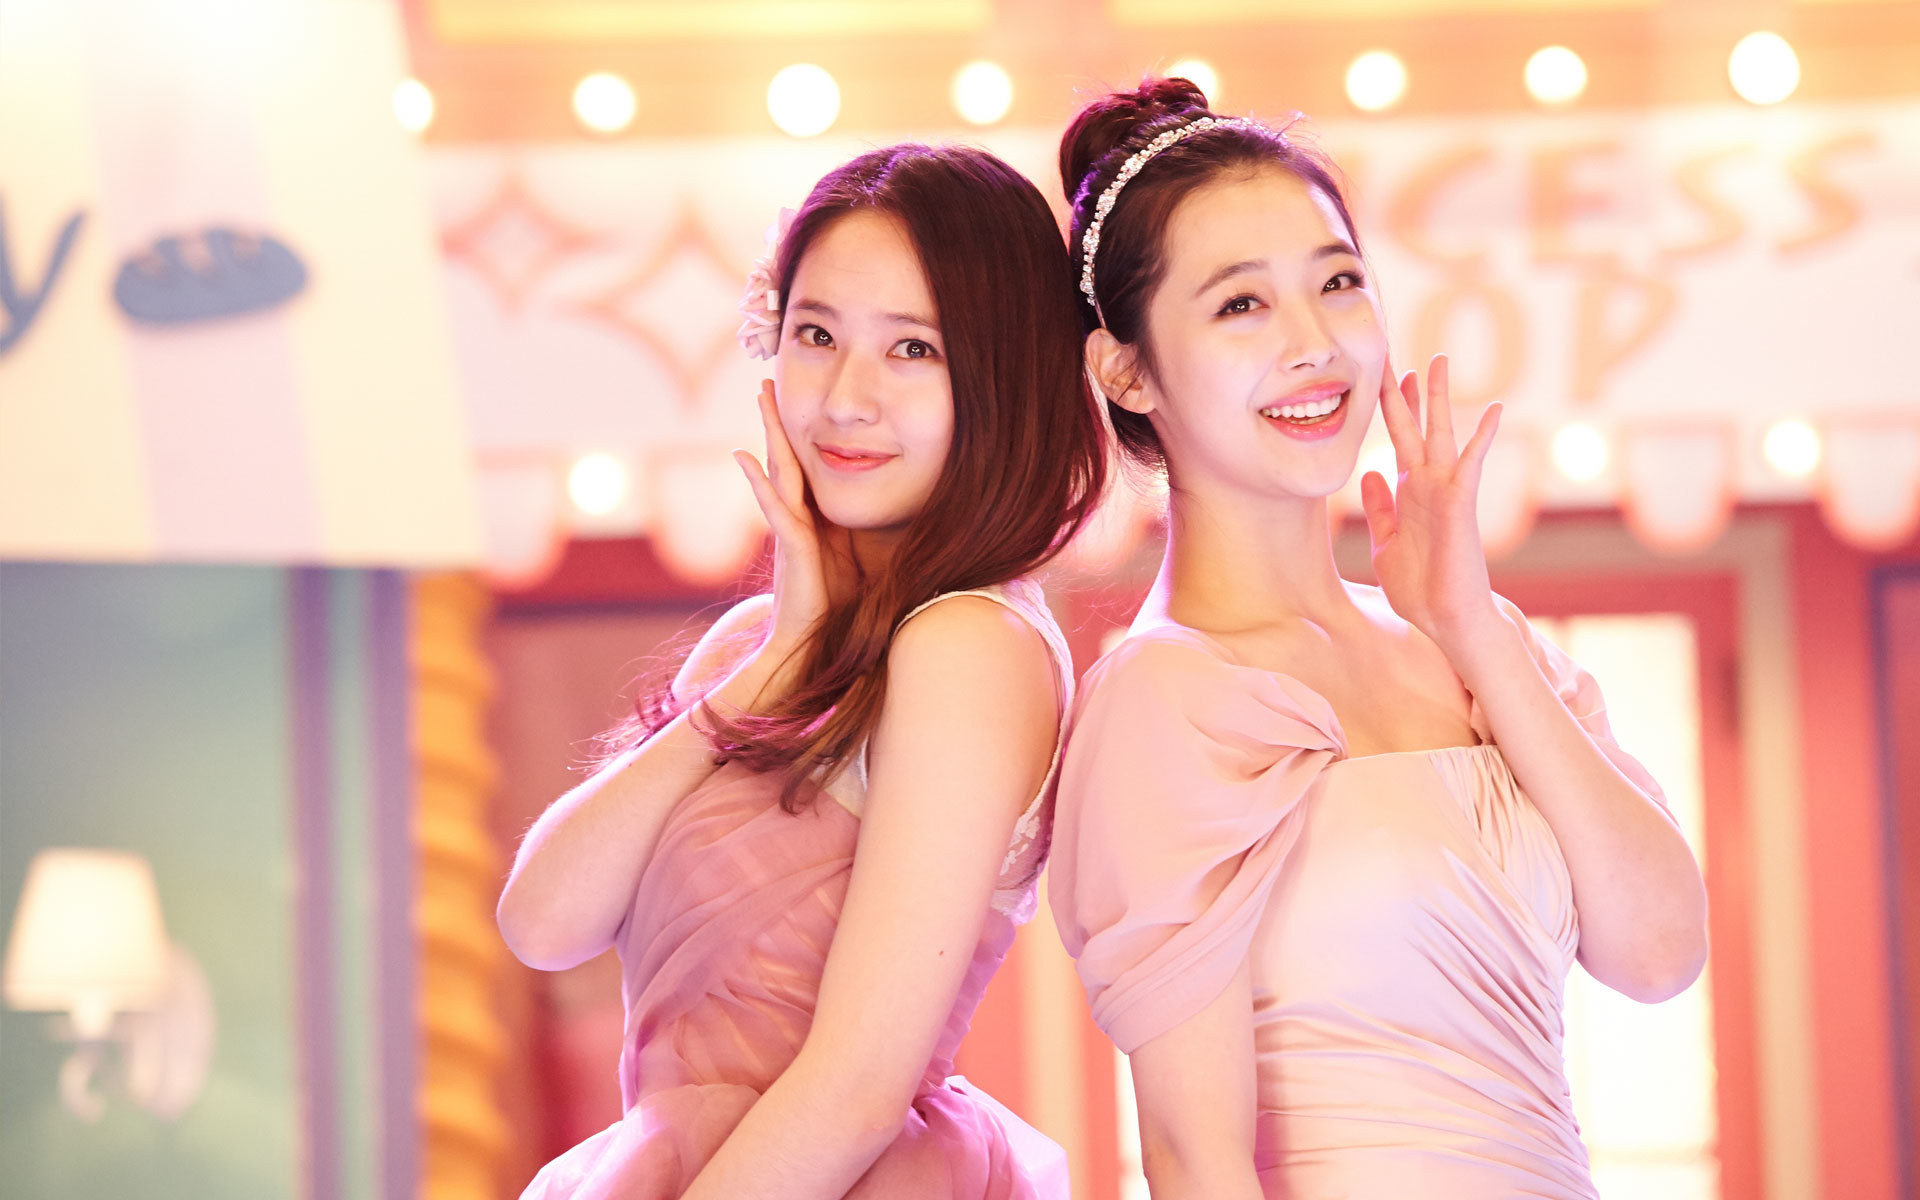 1920x1200 [OFFICIAL] 140305 f(Sulli)+f(Krystal) = Etude House Wallpapers [11P]